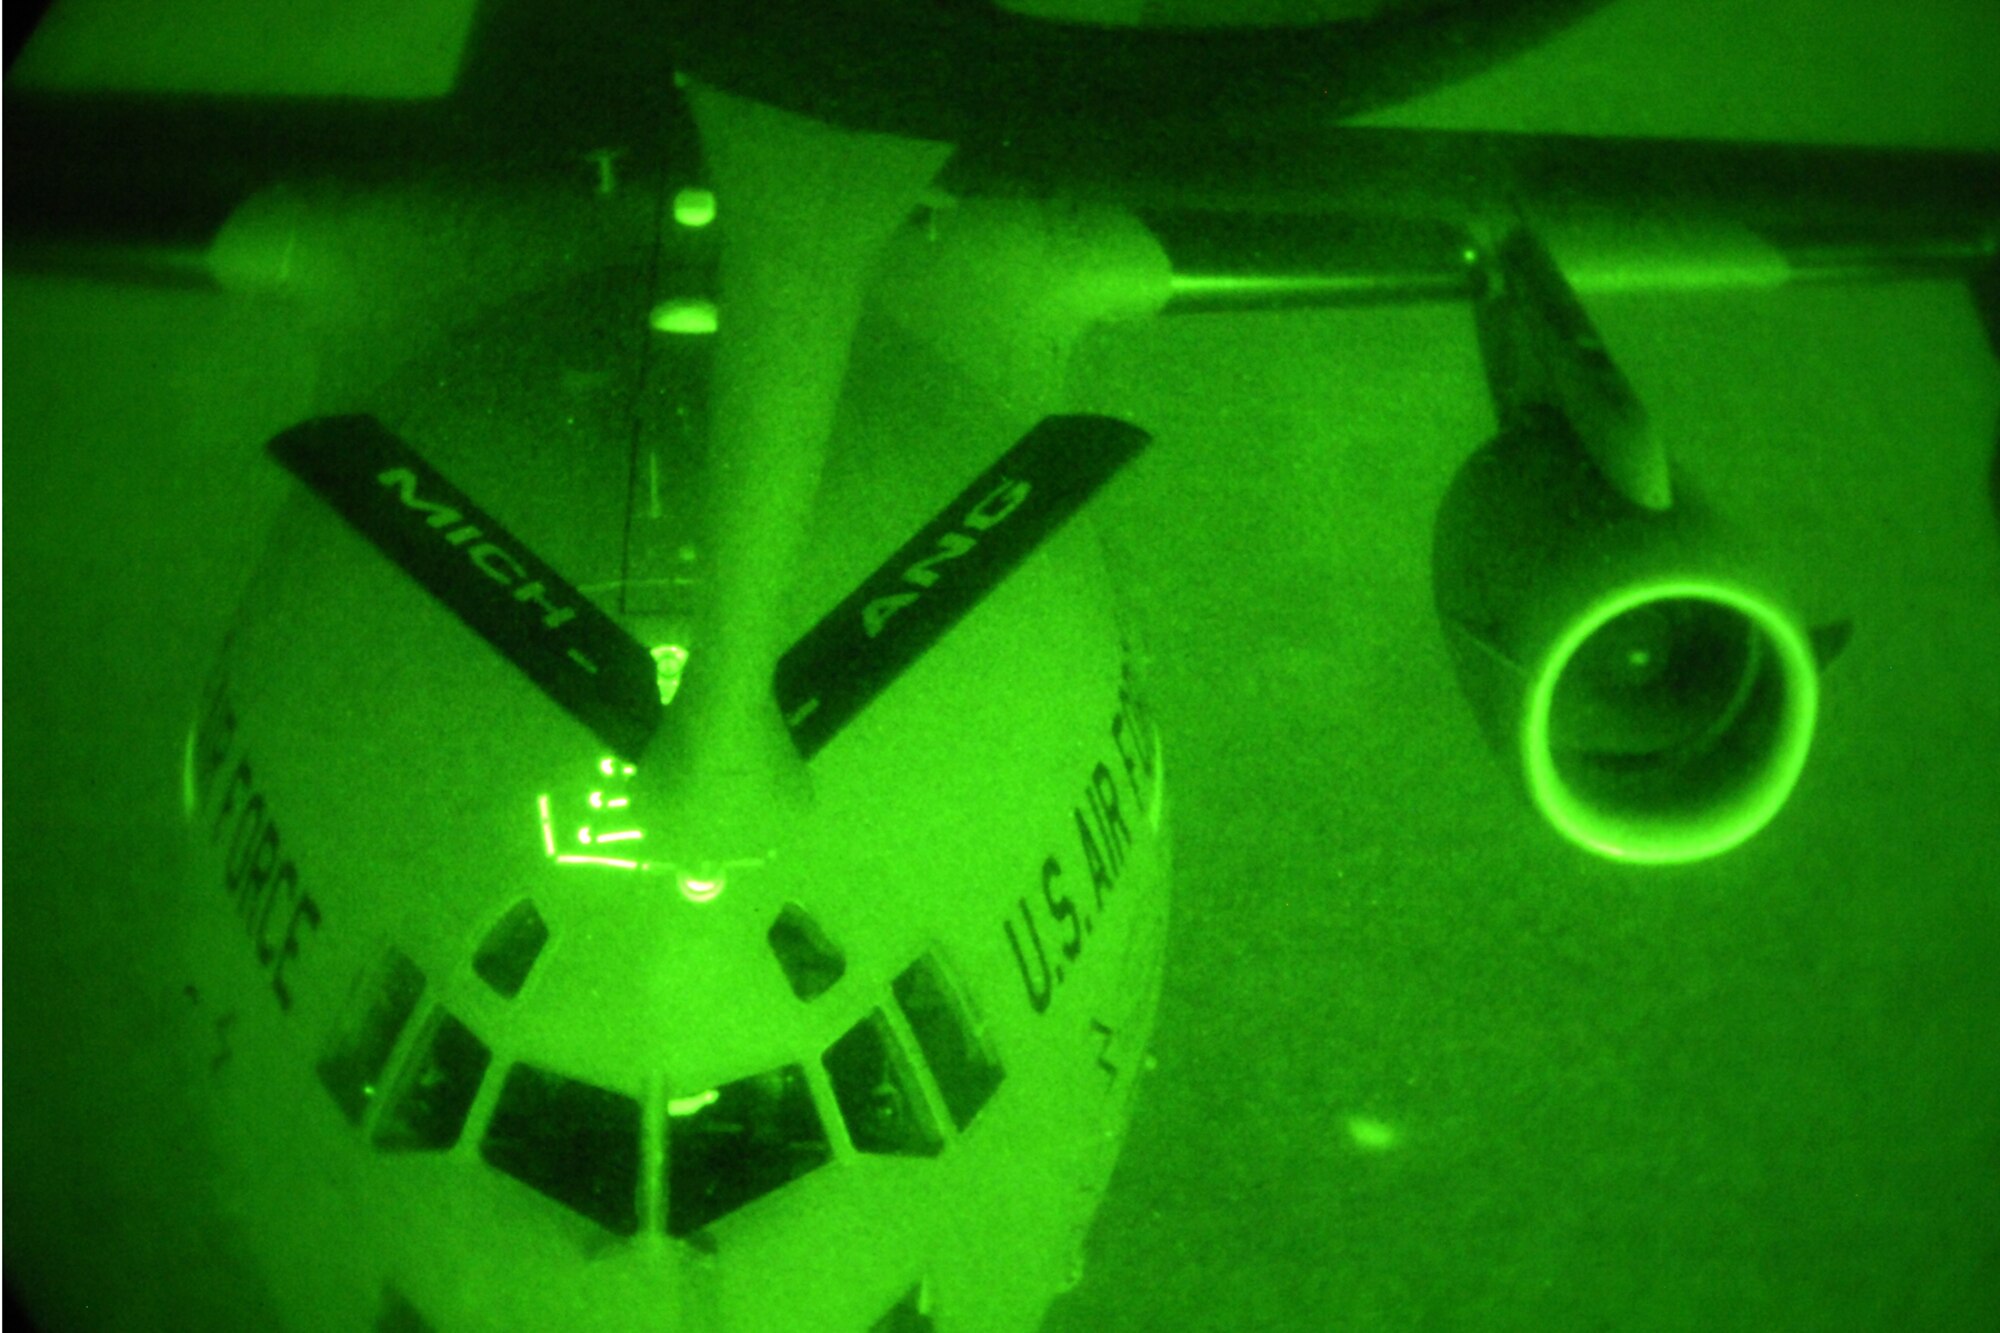 150825-Z-EZ686-232 -- A KC-135 Stratotanker from the 127th Air Refueling Group, Selfridge Air National Guard Base, Mich., is seen via a night-vision filter as it performs a night time refueling for a C-17 Globemaster III from the 445th Airlift Wing during a training mission on Aug. 25, 2015. The KC-135 Stratotanker is operated by the 127th Air Refueling Group, flown by the 171st Air Refueling Squadron and maintained by the 191st Maintenance and 191st Aircraft Maintenance squadrons. (U.S. Air National Guard photo by Master Sgt David Kujawa / Released)